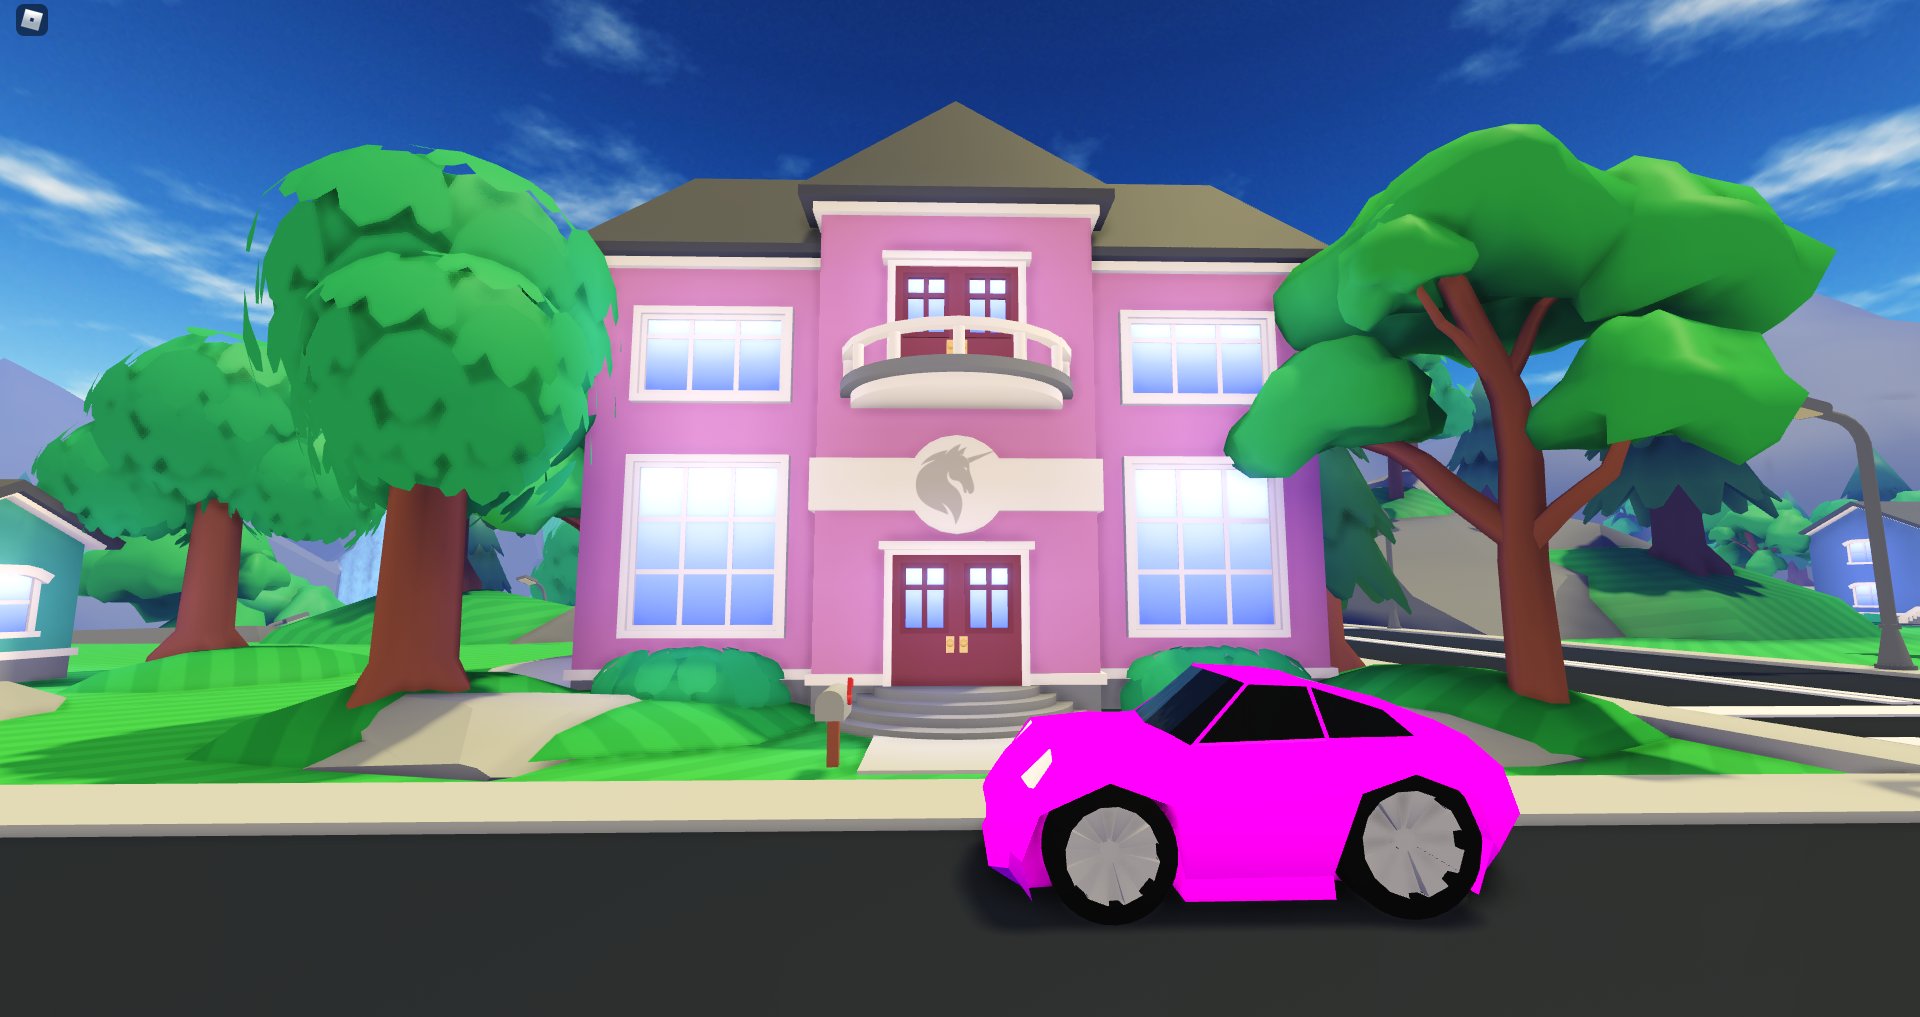 Code Honey On Twitter Everything Pink Please Our New Game Overlook Bay Is Getting Closer And Closer To Coming Out Official Release Date Announcement Coming Sometime This Month Overlookbay Https T Co Yfk22t7aqc - overlook bay roblox release date